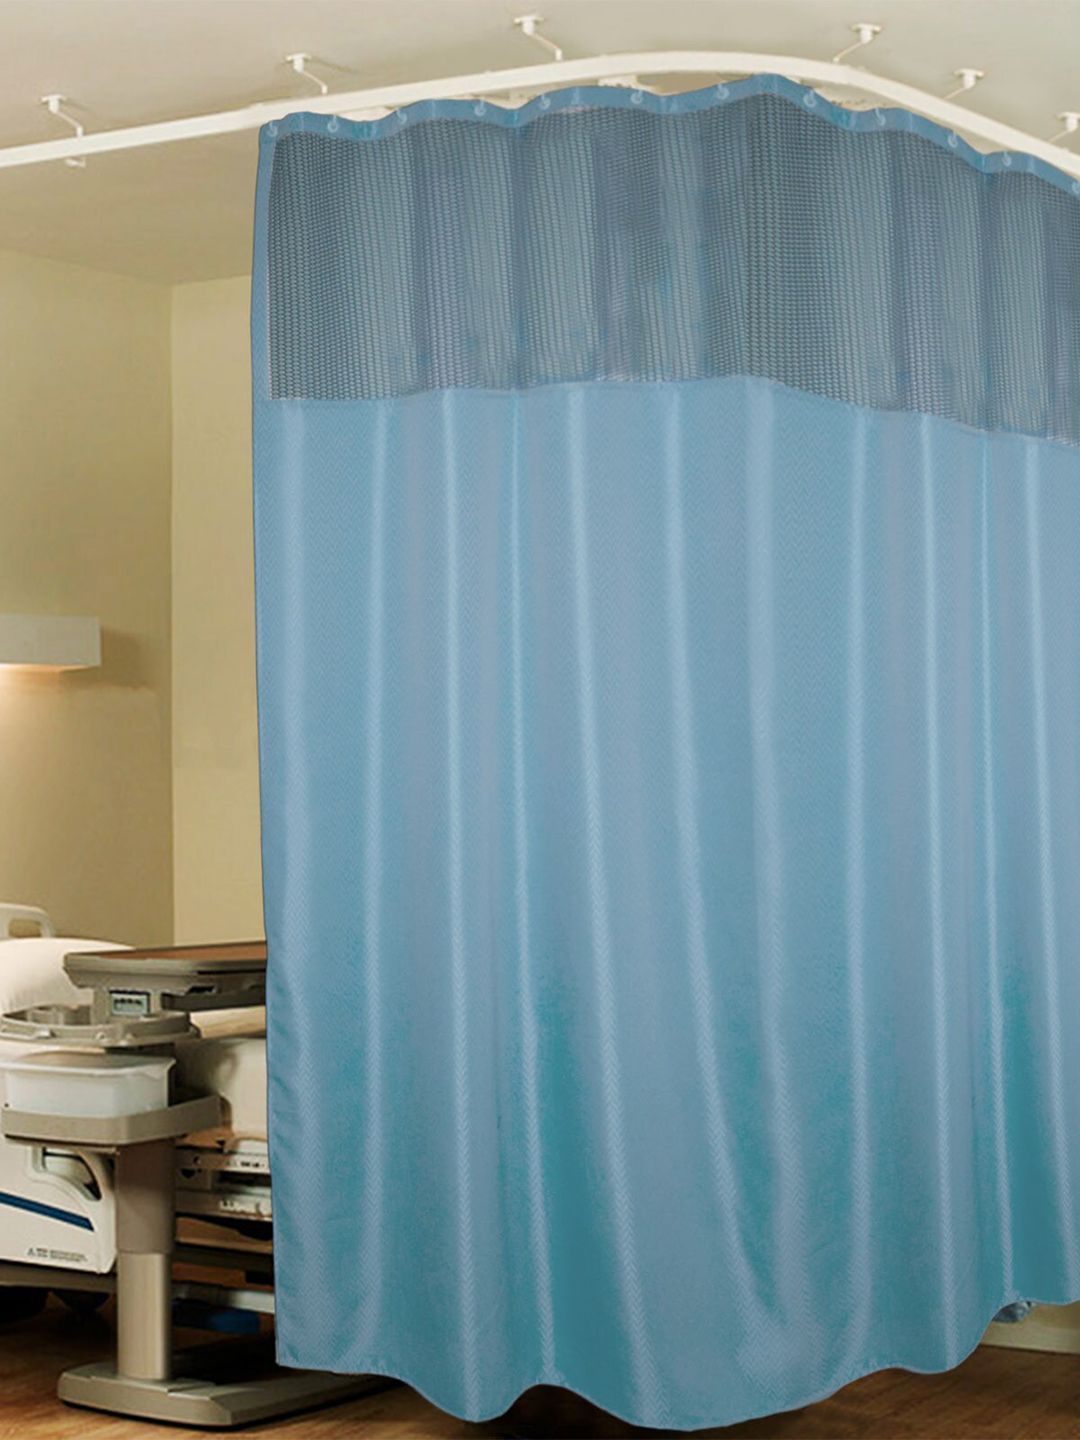 Lushomes Blue Geometric Hospital Bed Partition Curtain Price in India